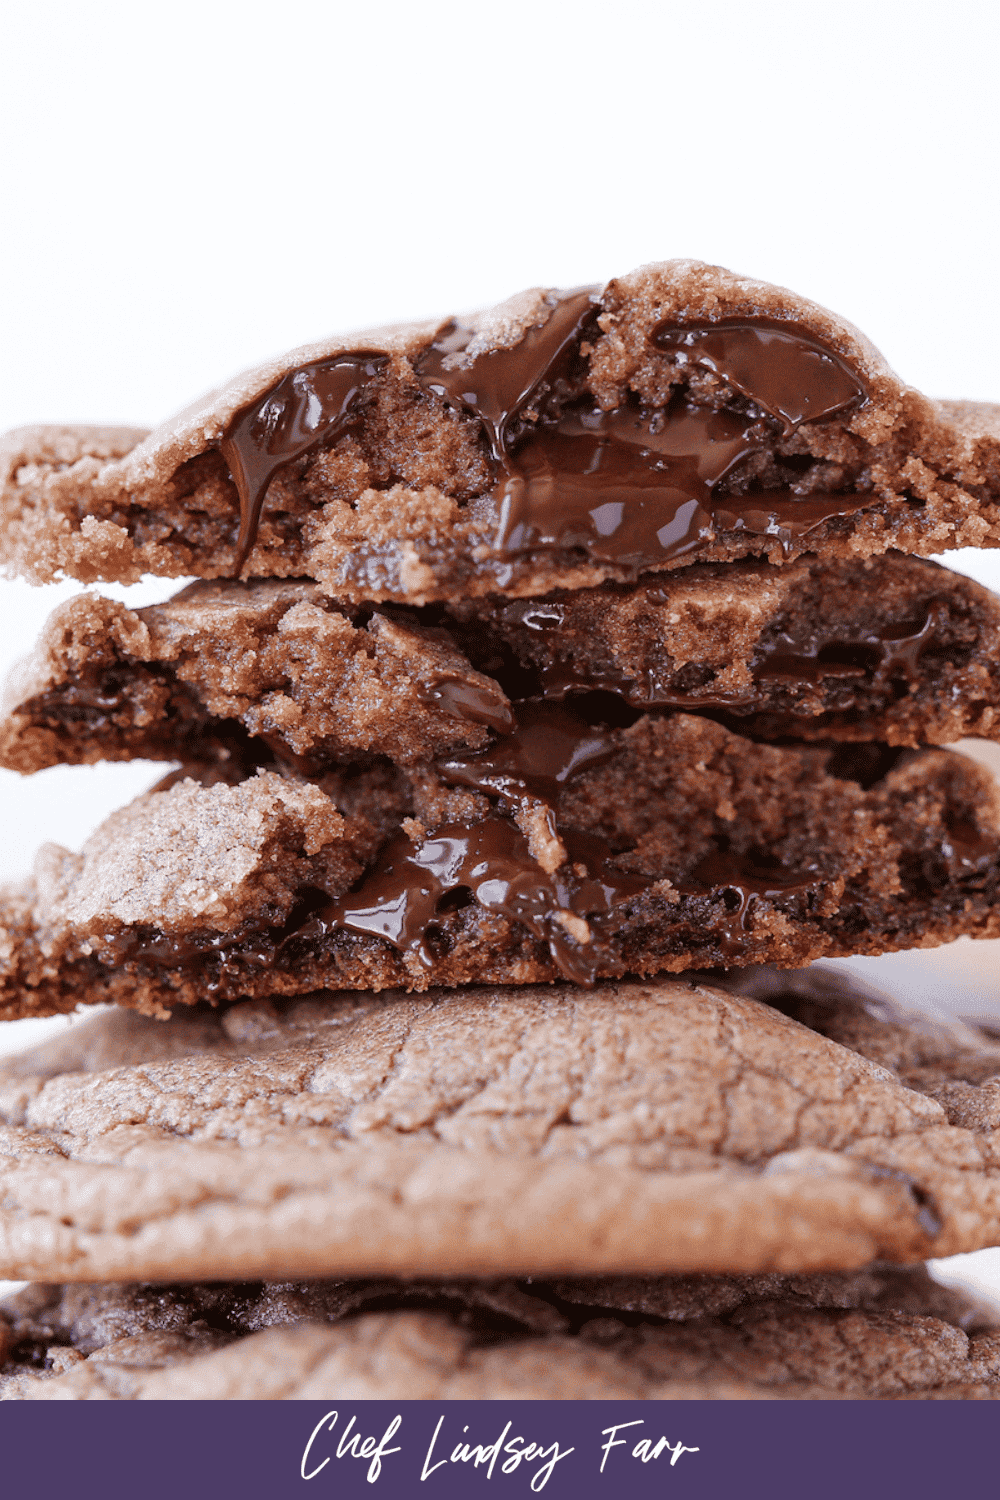 Nutella cookies stacked showing the gooey chocolate inside.